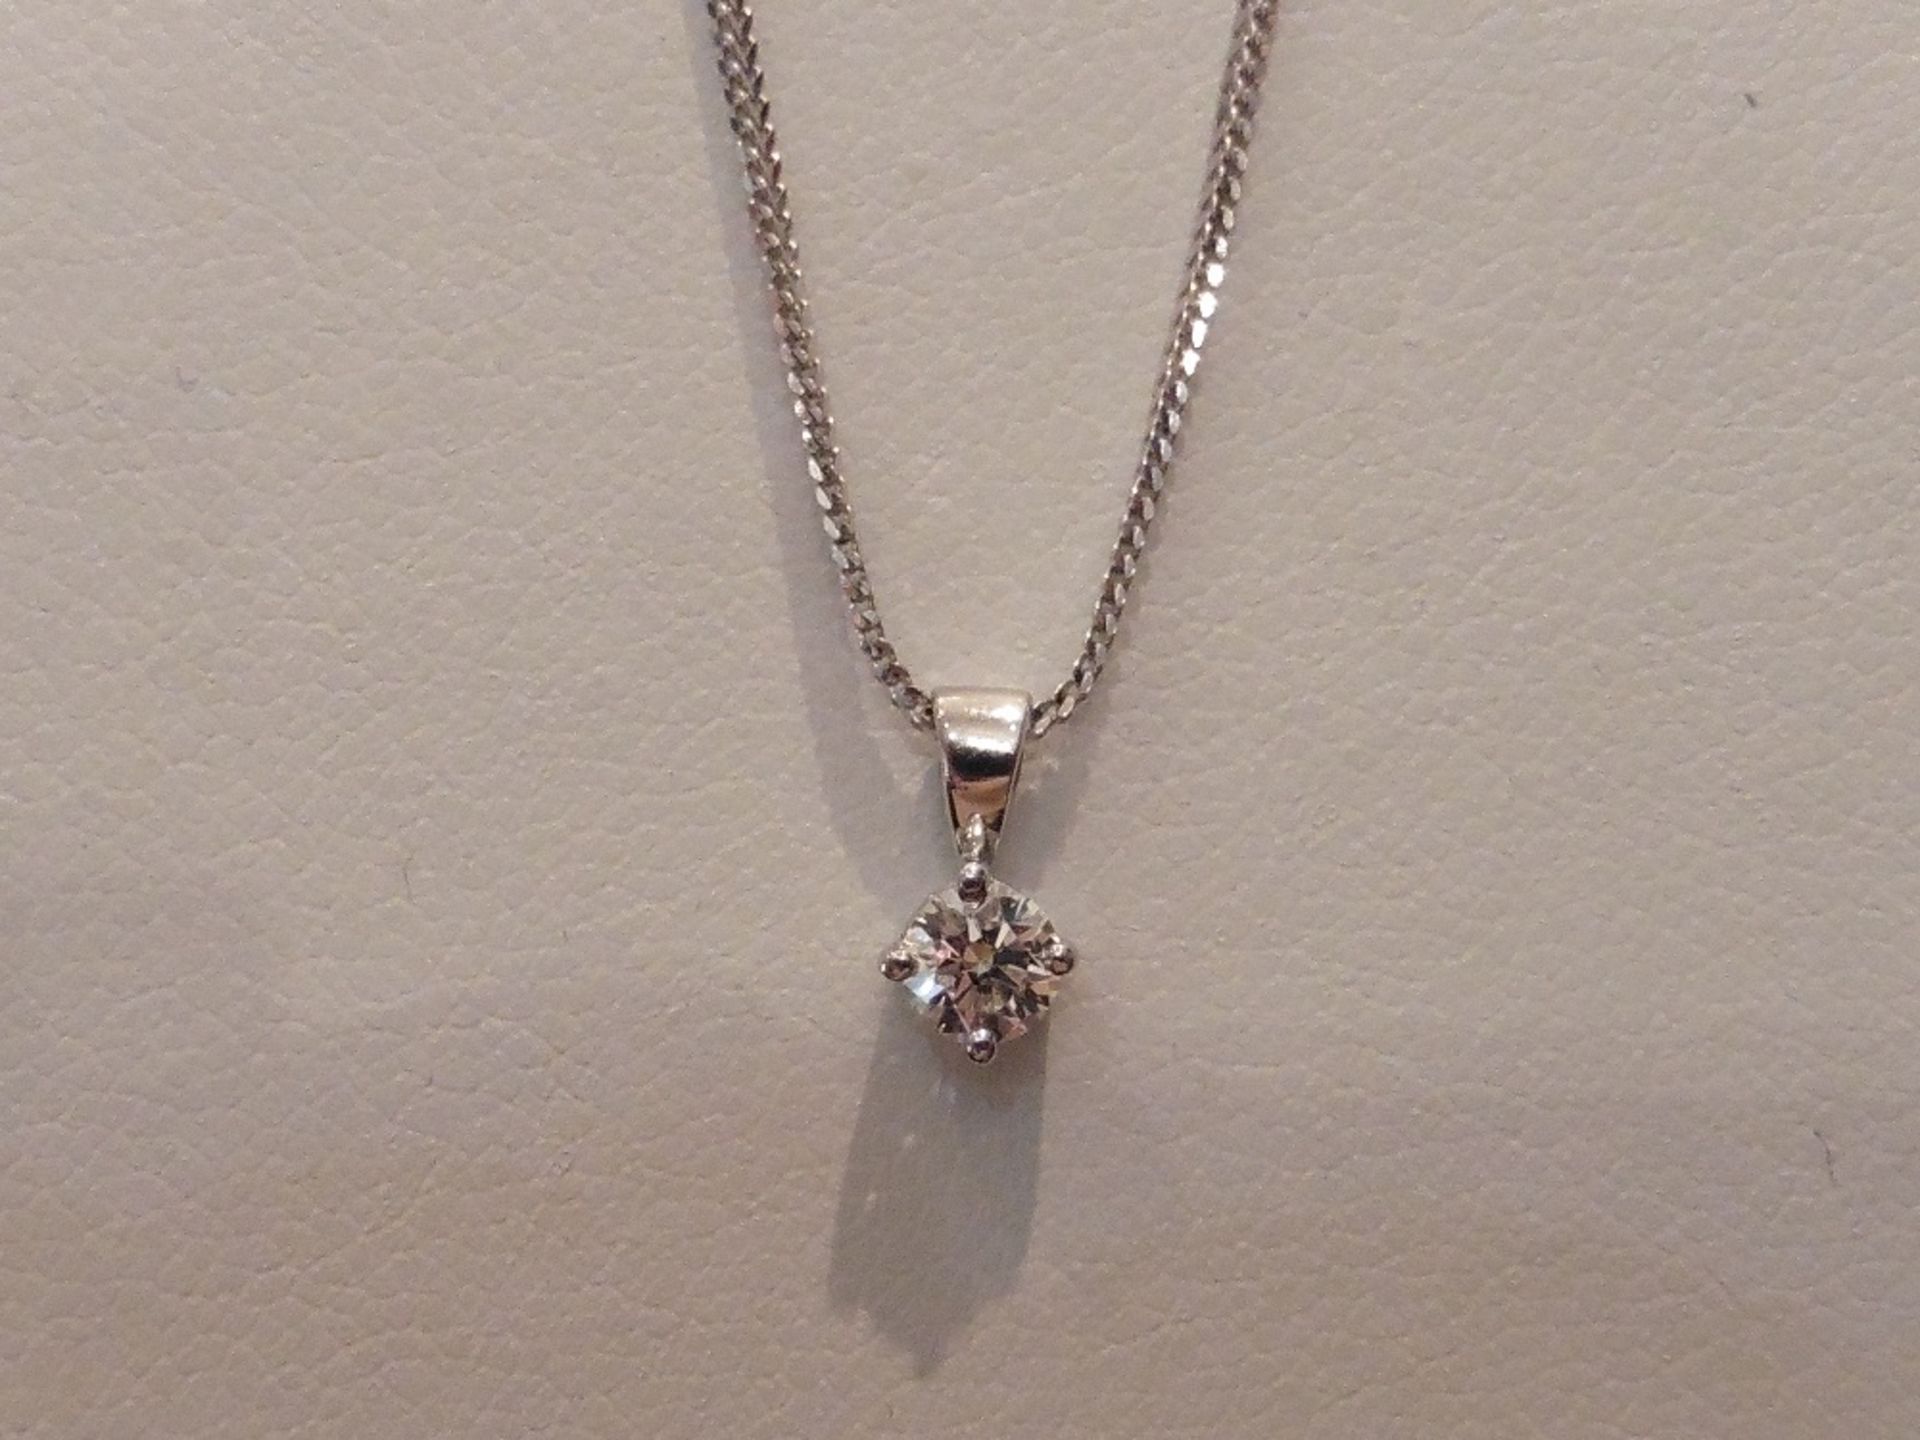 18ct white gold diamond solitaire style pendant set with a single brilliant cut diamond weighing 0.2